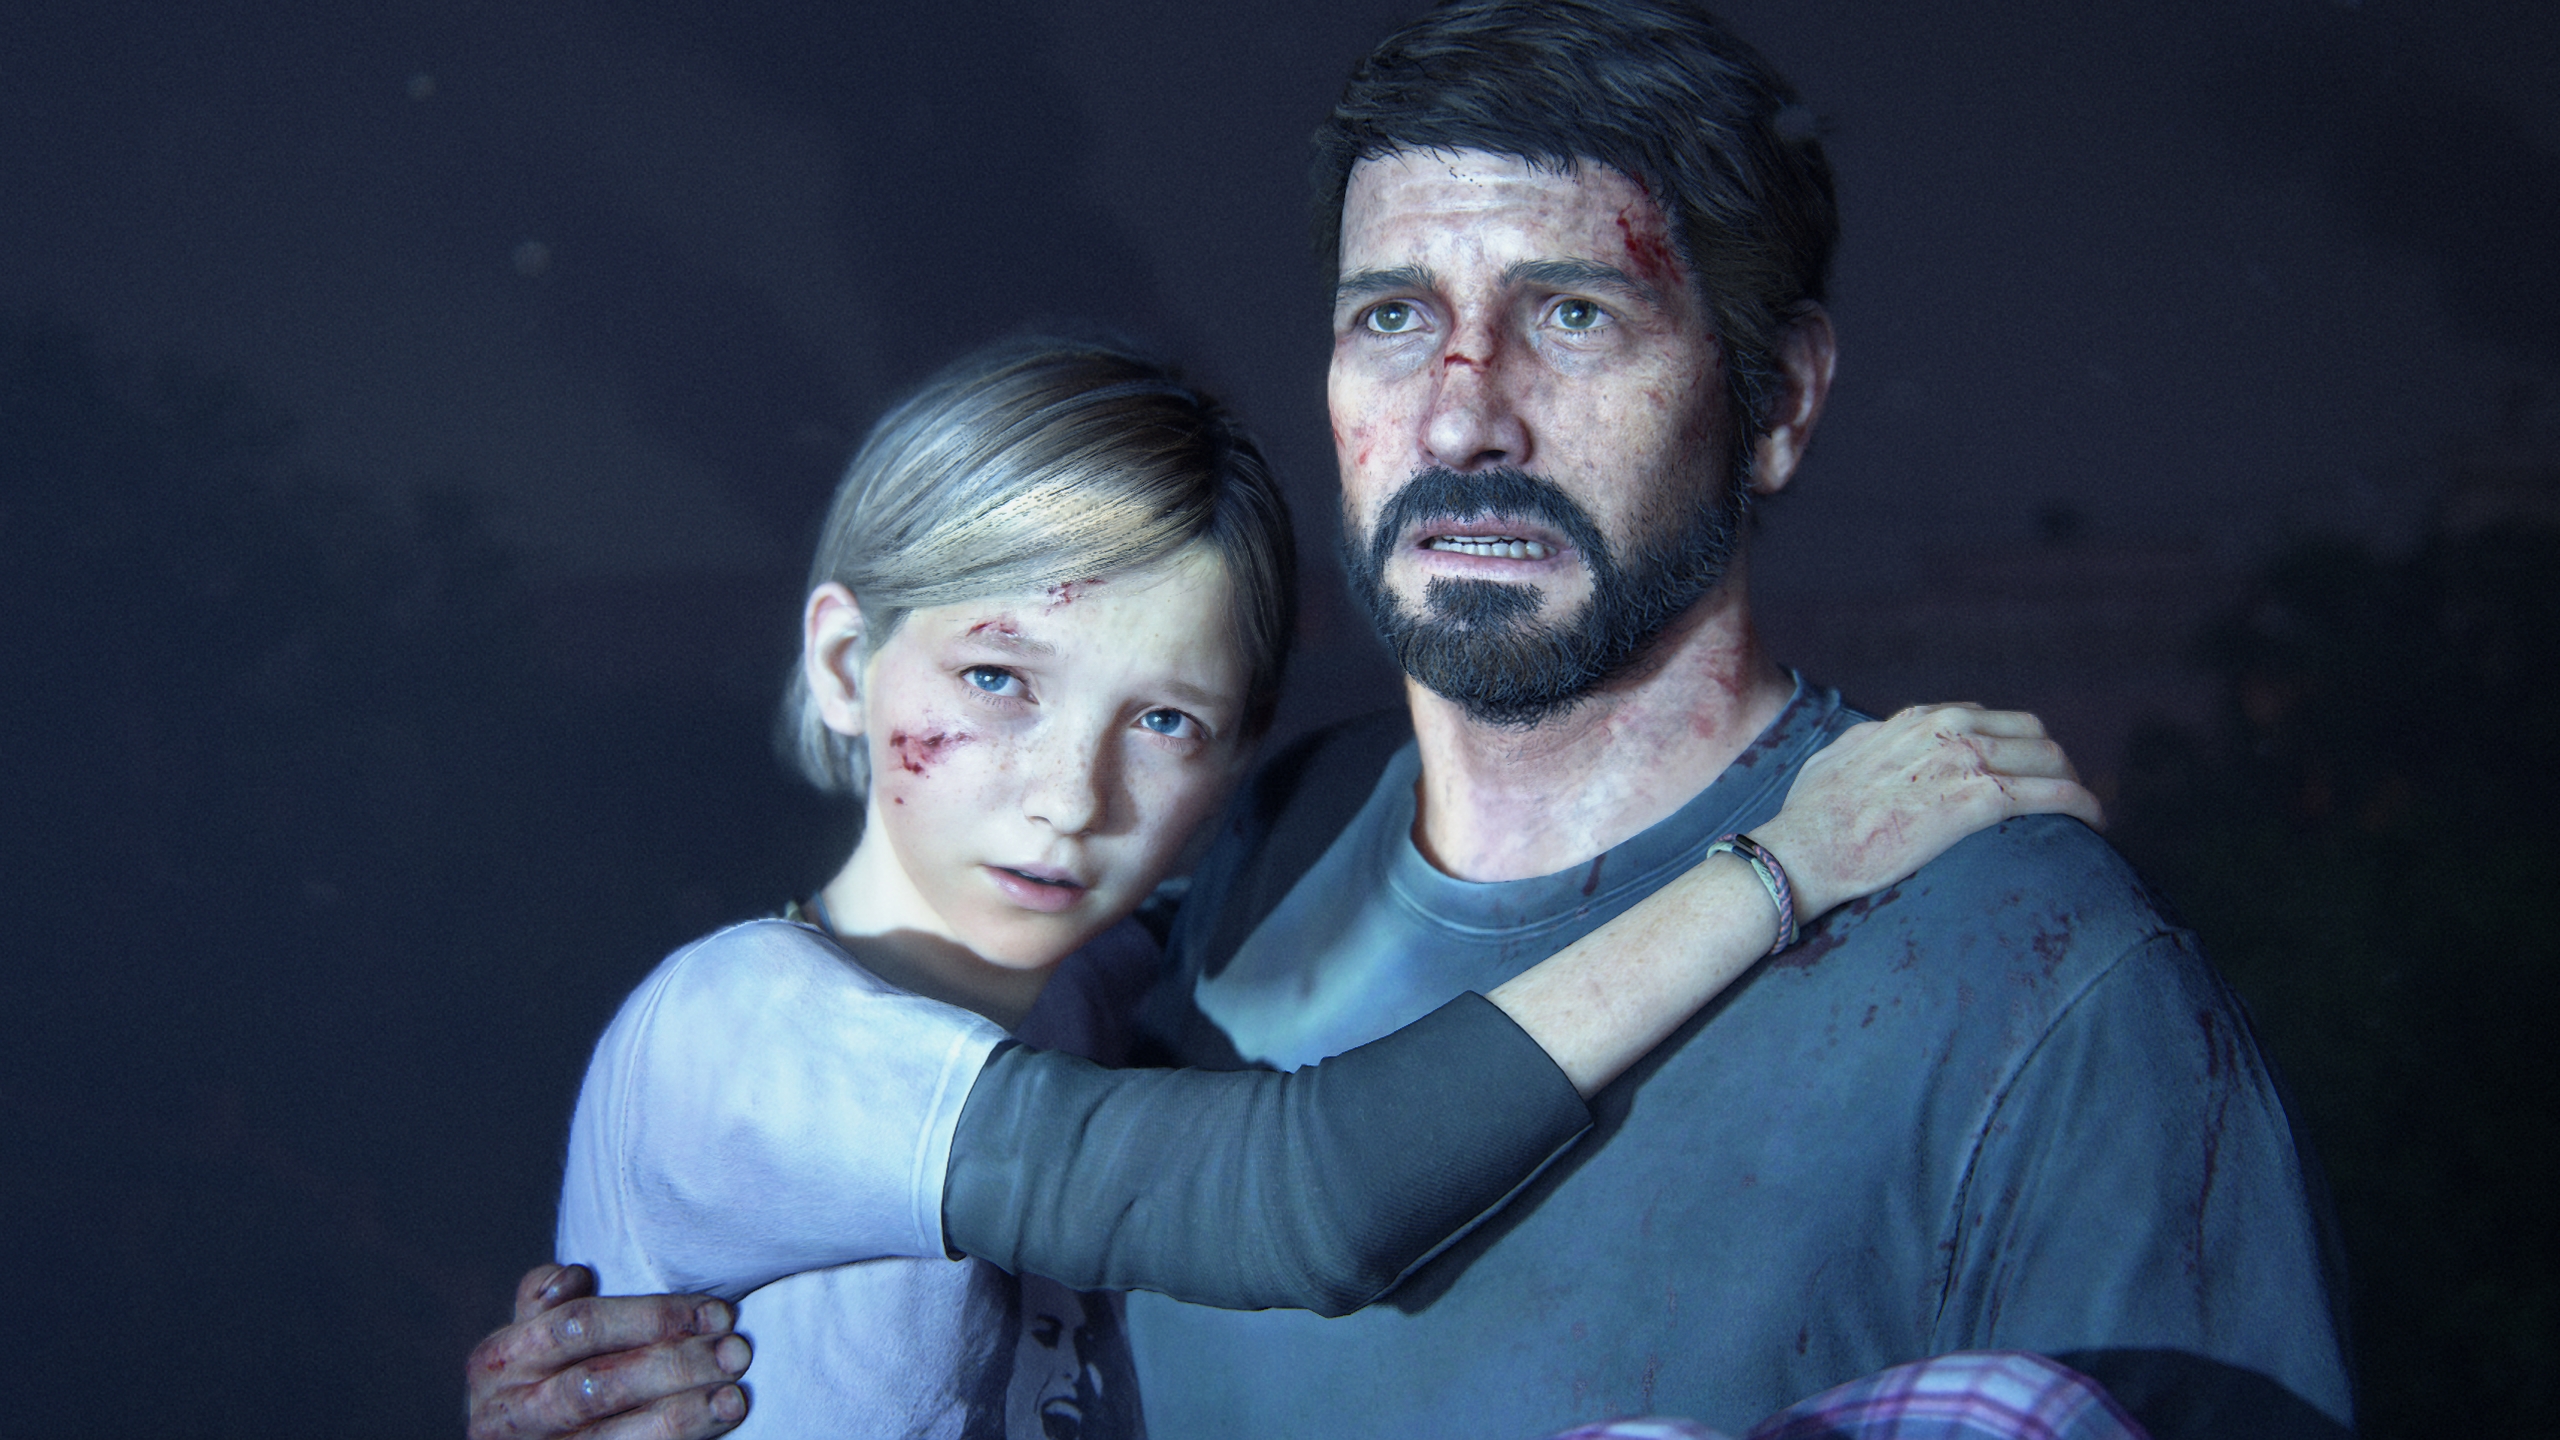 The Last of Us Part 2: Naughty Dog Teased New Game 3 Months Ago